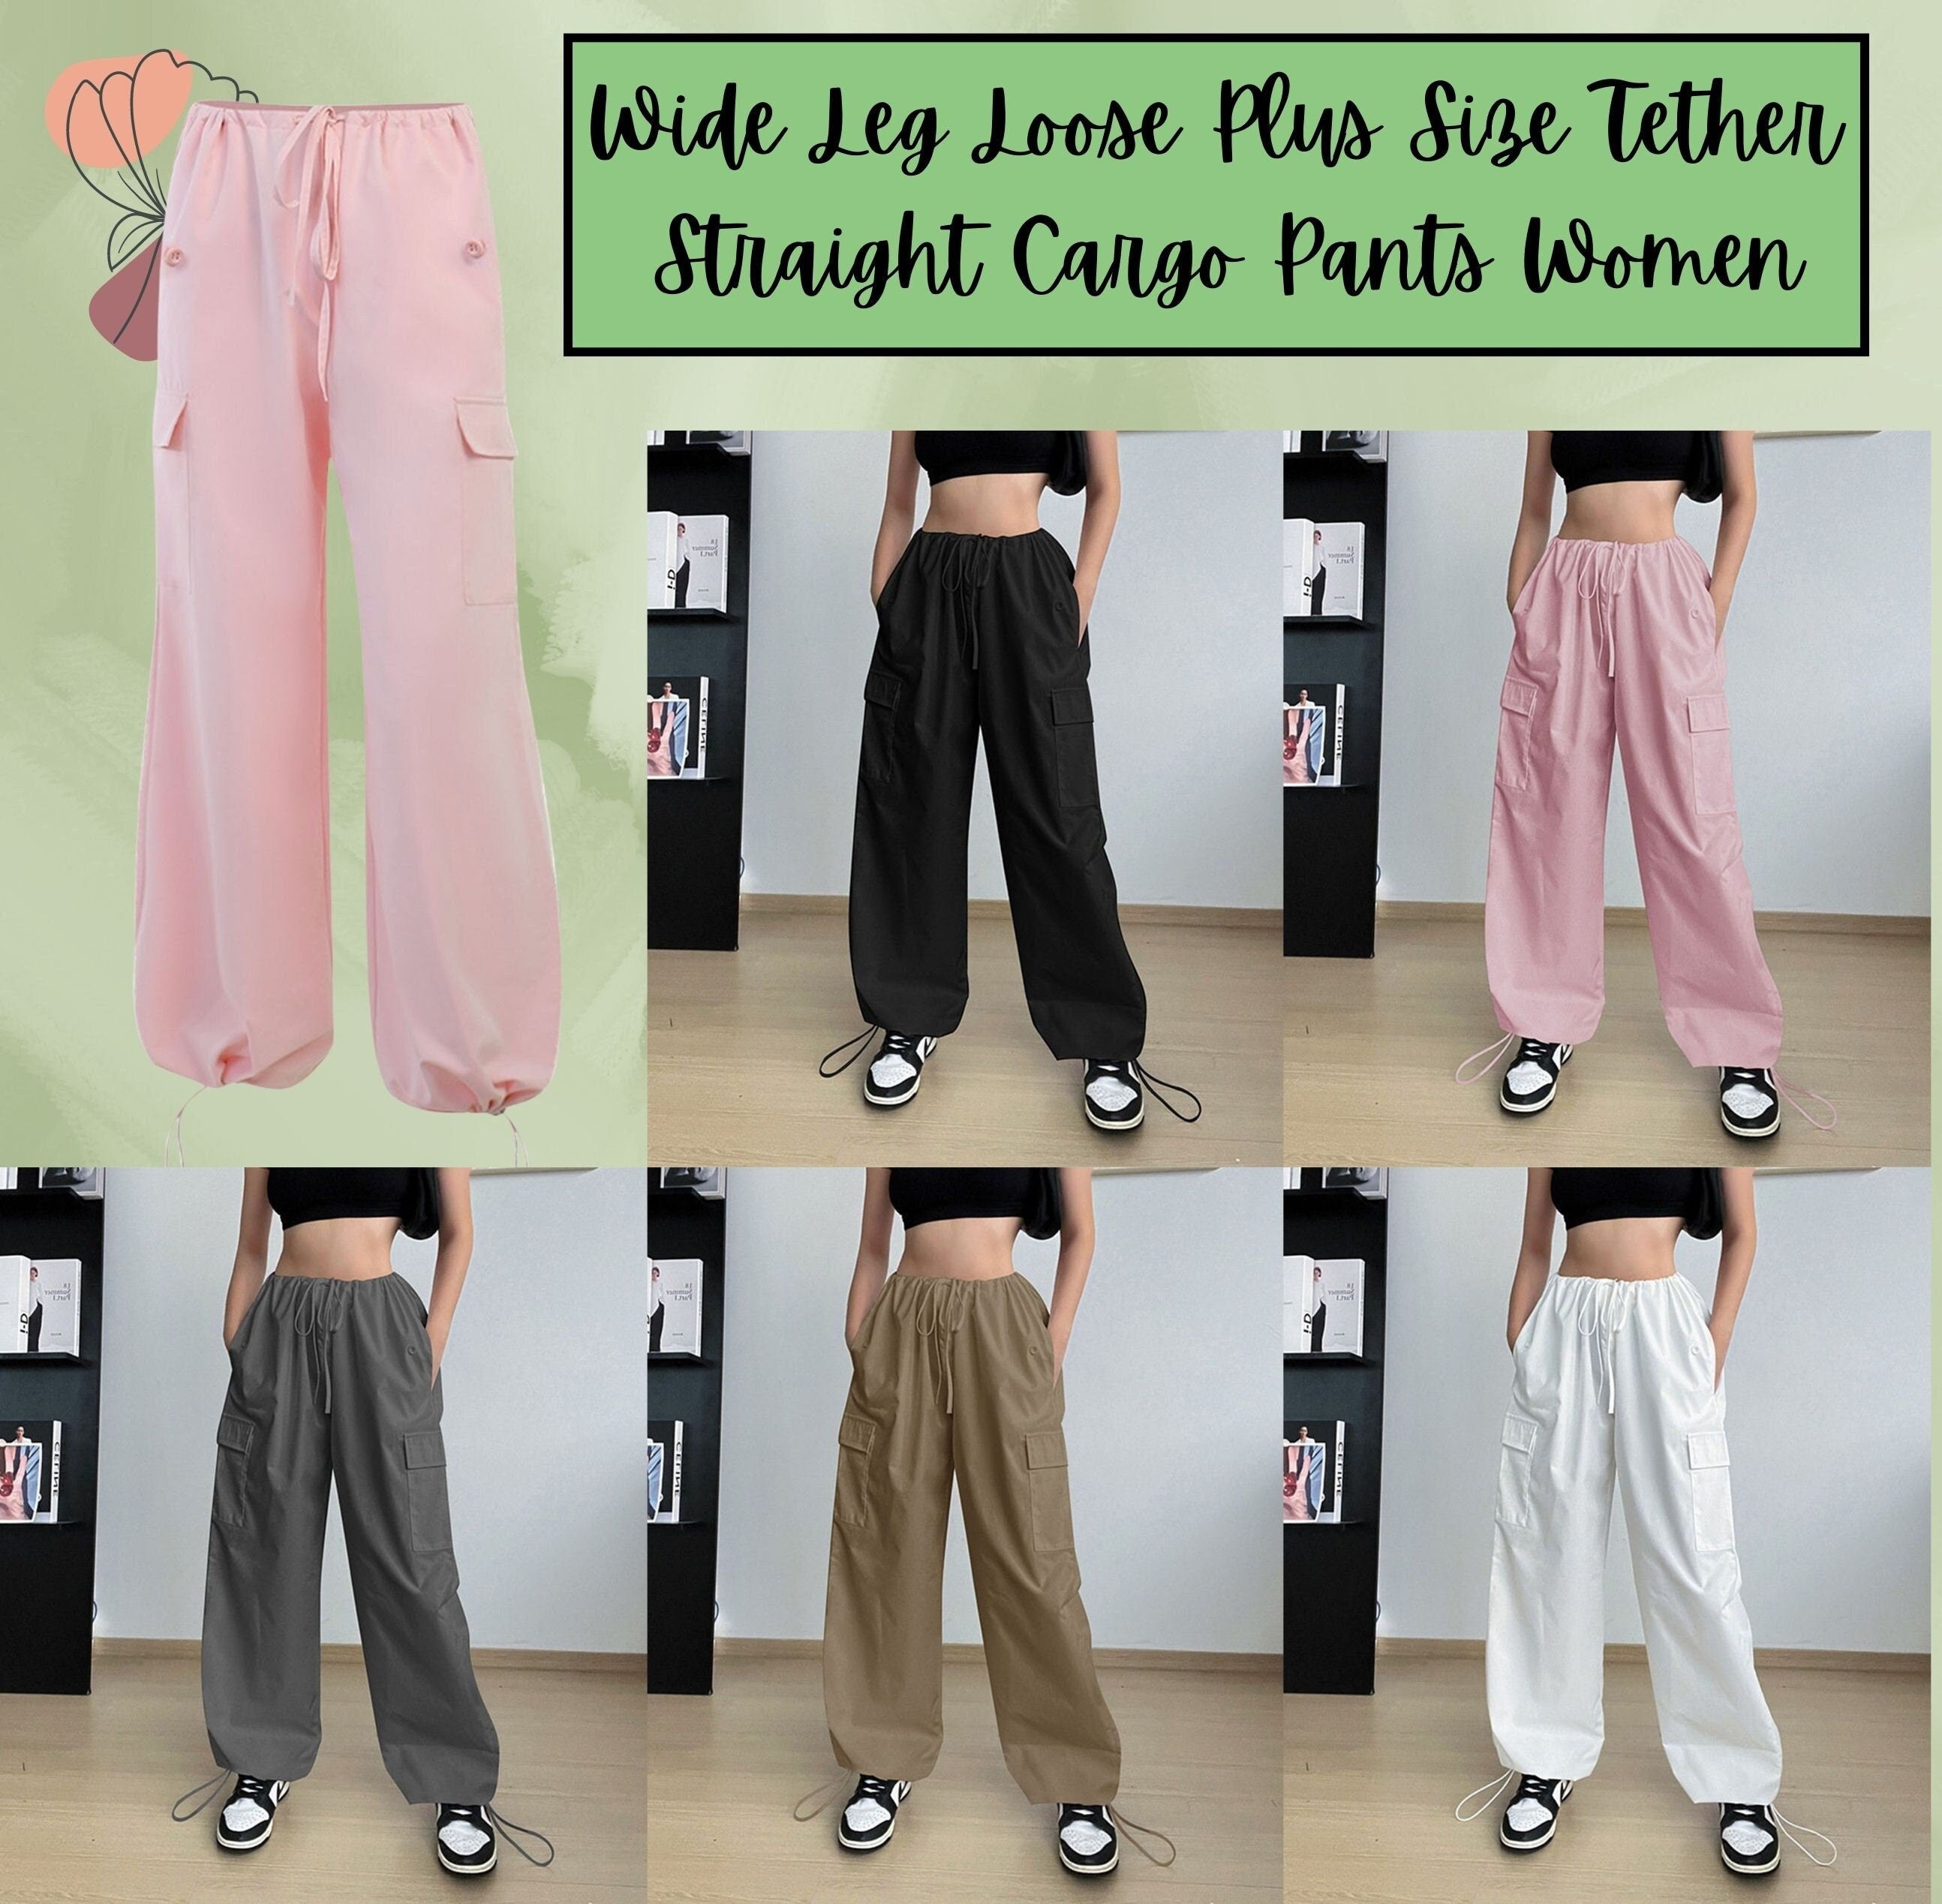 Upgrade Your Style with Plus-Size Cargo Pants for Women